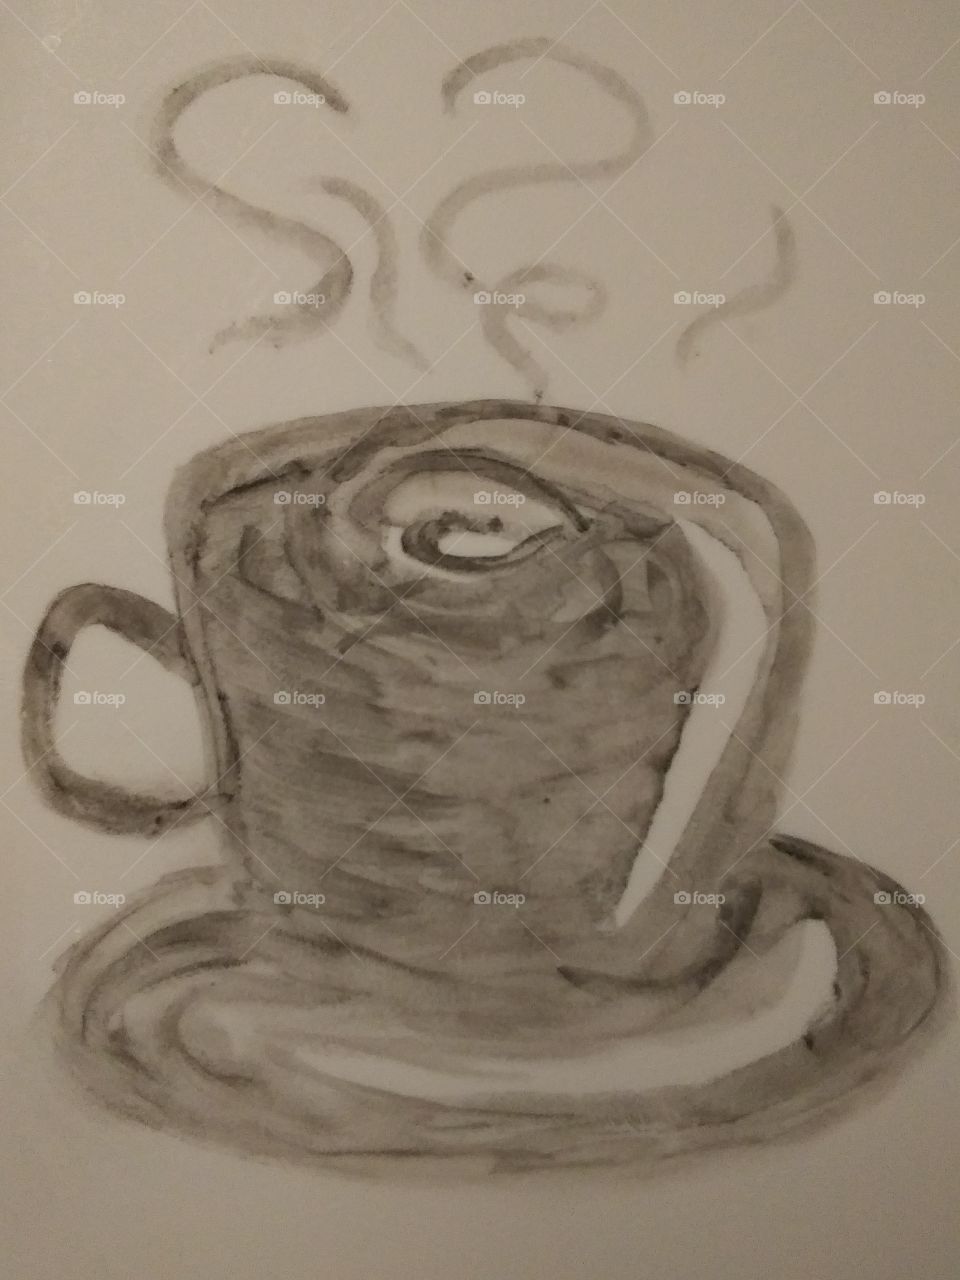 Water painted coffee cup.